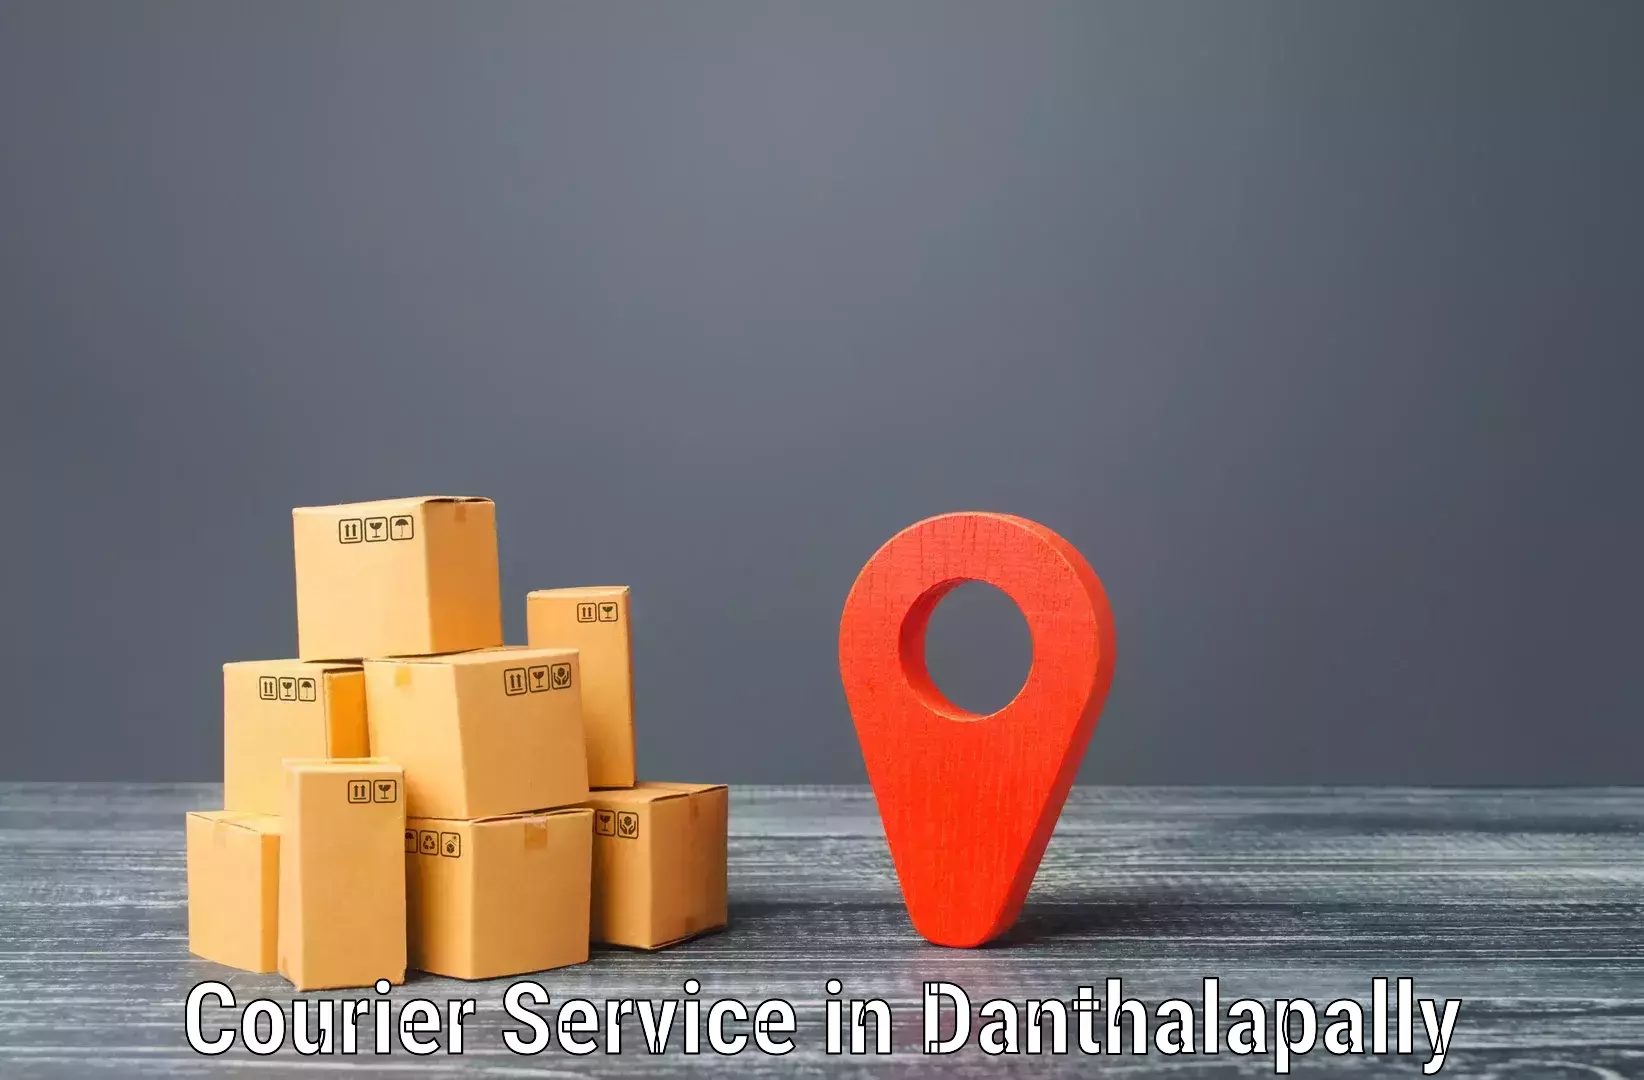 Comprehensive freight services in Danthalapally